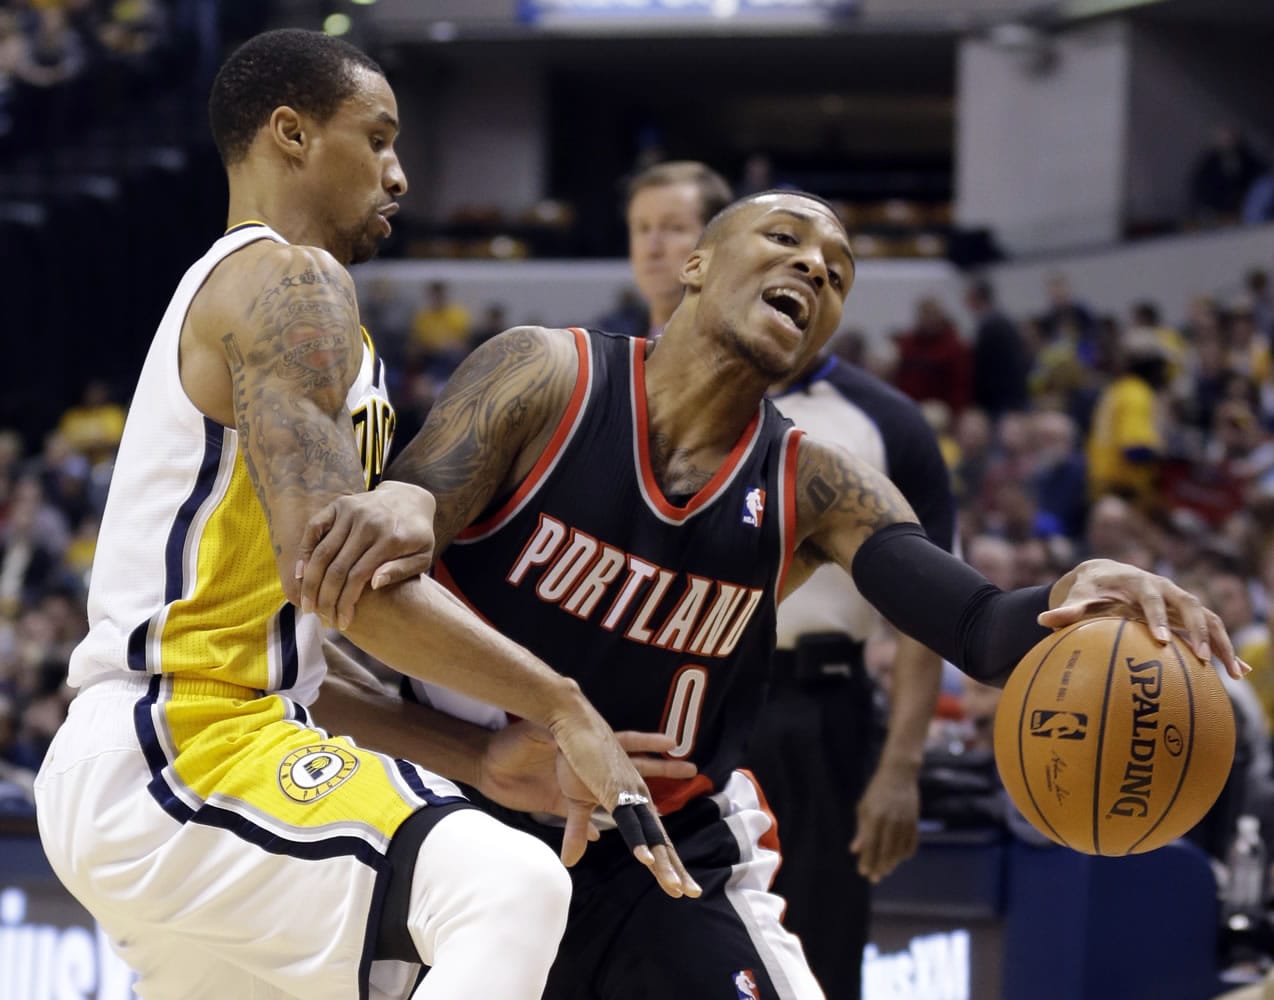 Portland Trail Blazers guard Damian Lillard, right, works against Indiana Pacers guard George Hill during the first half at Indianapolis on Friday.